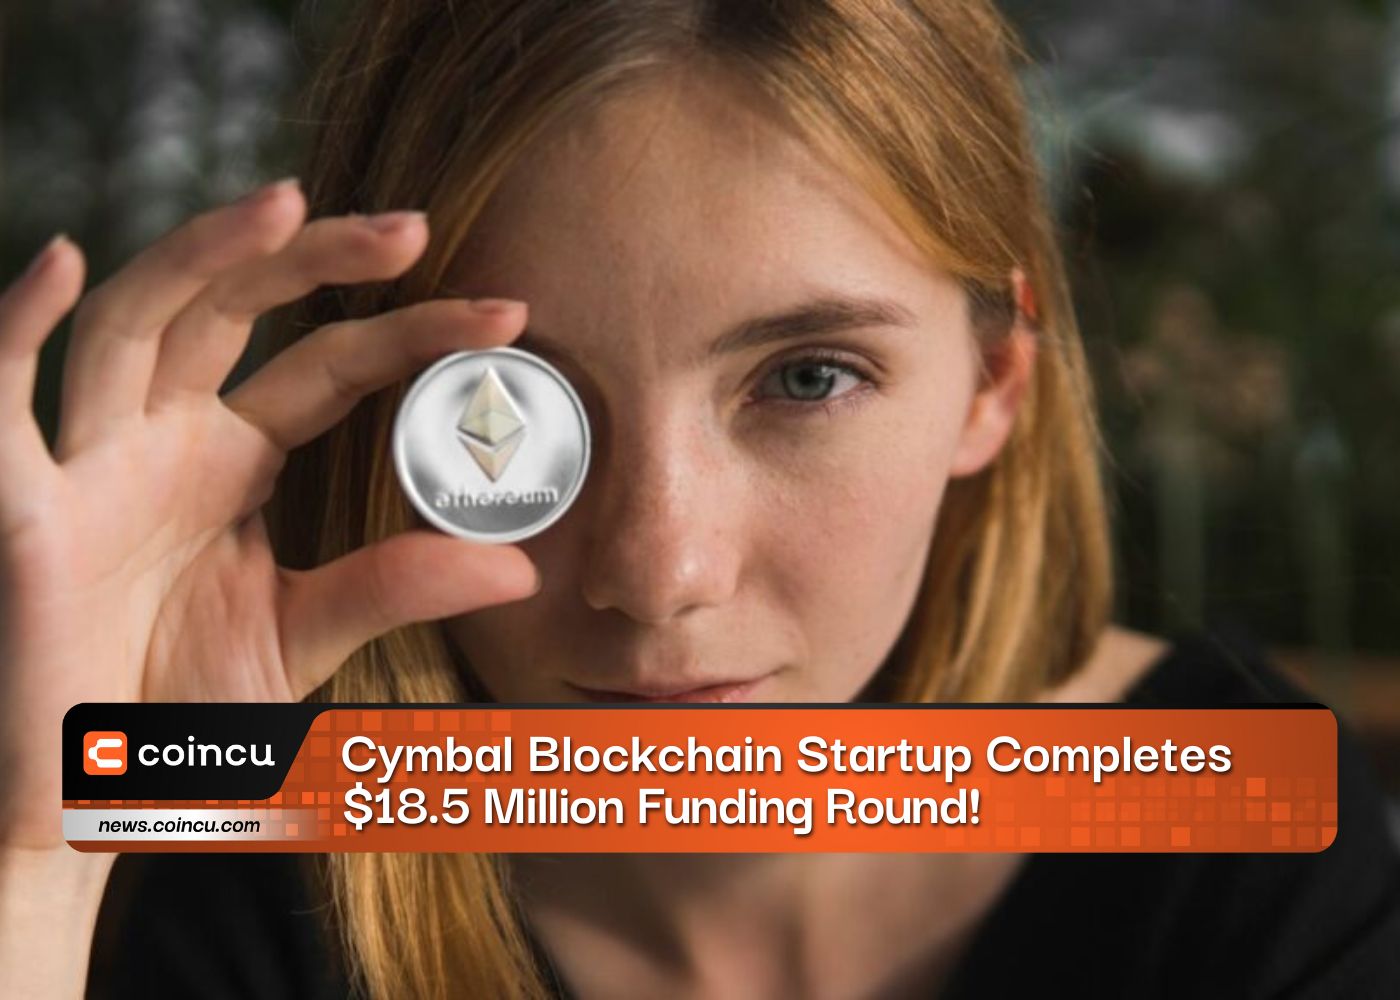 Cymbal Blockchain Startup Completes $18.5 Million Funding Round!